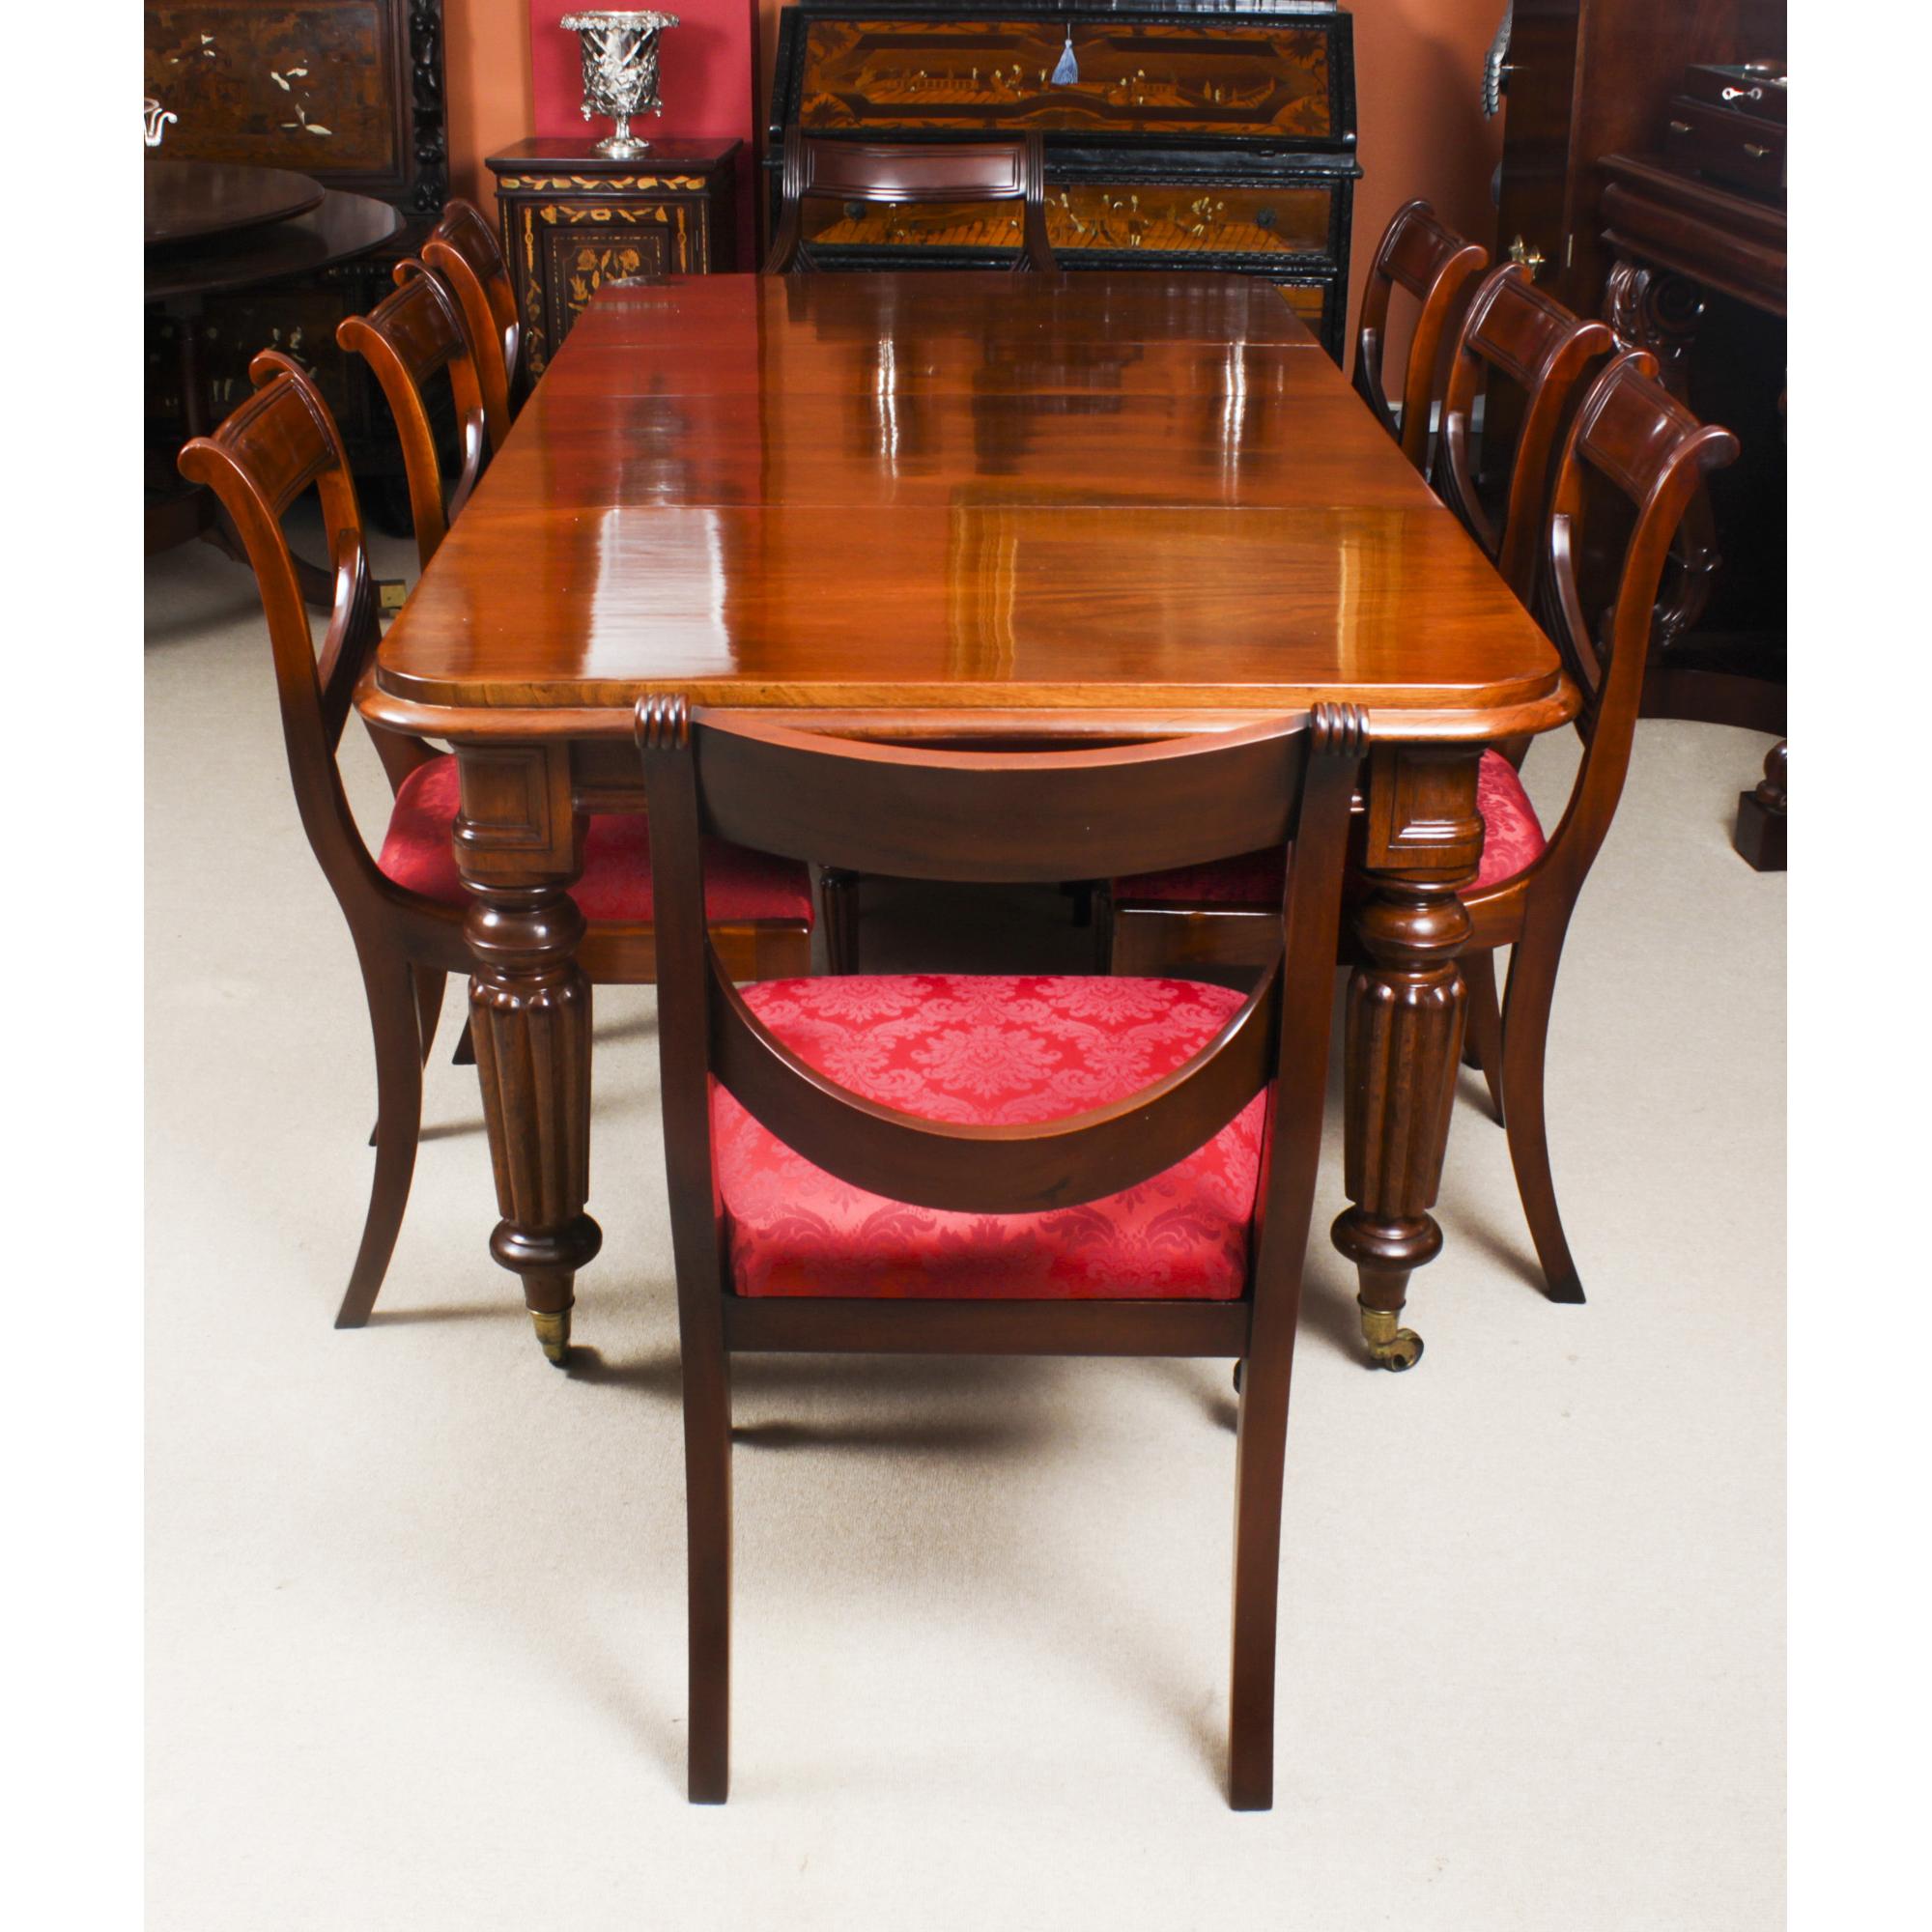 A very rare opportunity to own a fabulous dining set comprising a good early antique early Victorian extending dining table by Gillows, of Lancaster, Circa 1840 in date and a set of eight Swag Back dining chairs, dating from the late 20th